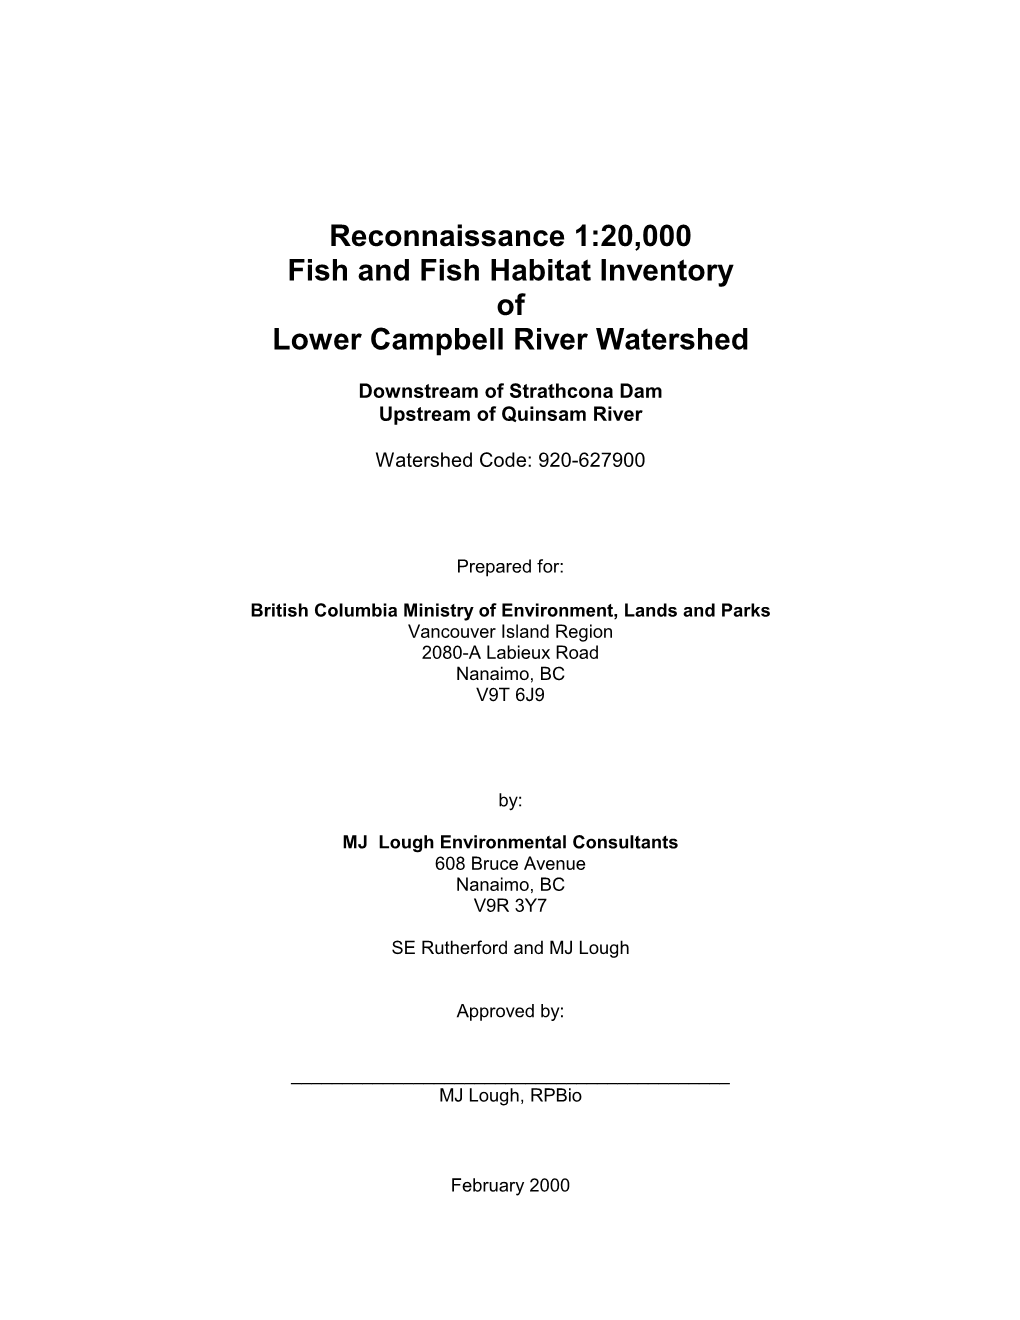 Reconnaissance Inventory of the Lower Campbell Watershed ______